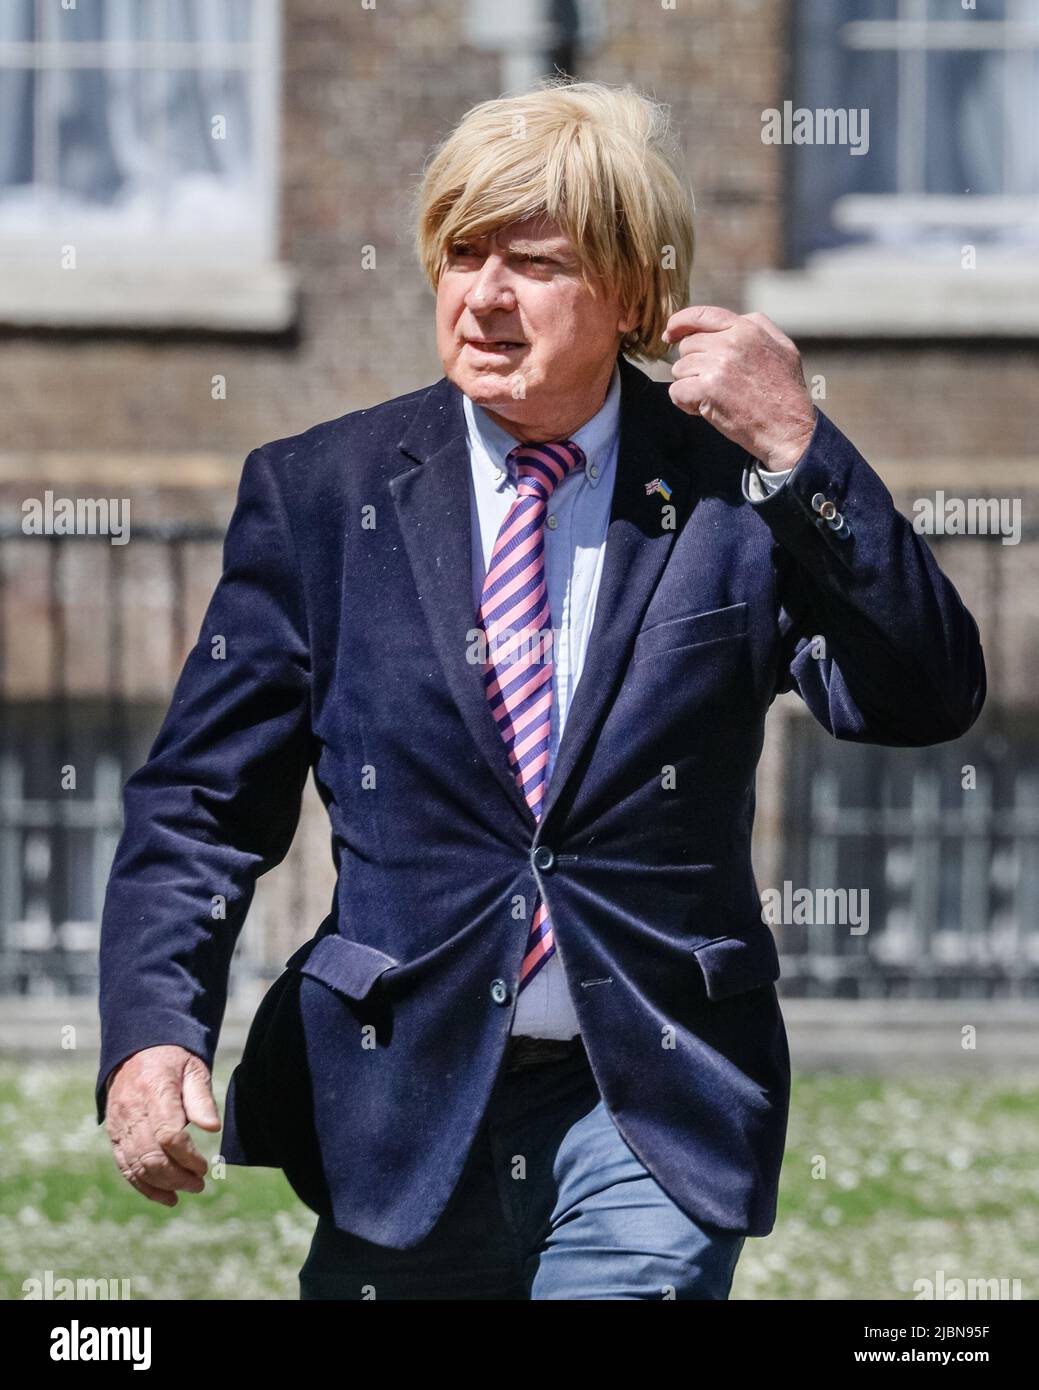 Westminster, London, UK. 07th June, 2022. Michael Fabricant, Conservative Party Member of Parliament for Lichfield. Politicians and commentators are interviewed on College Green in Westminster to give their reactions to yesterday's vote of confidence in the PM and the general political situation. Credit: Imageplotter/Alamy Live News Stock Photo